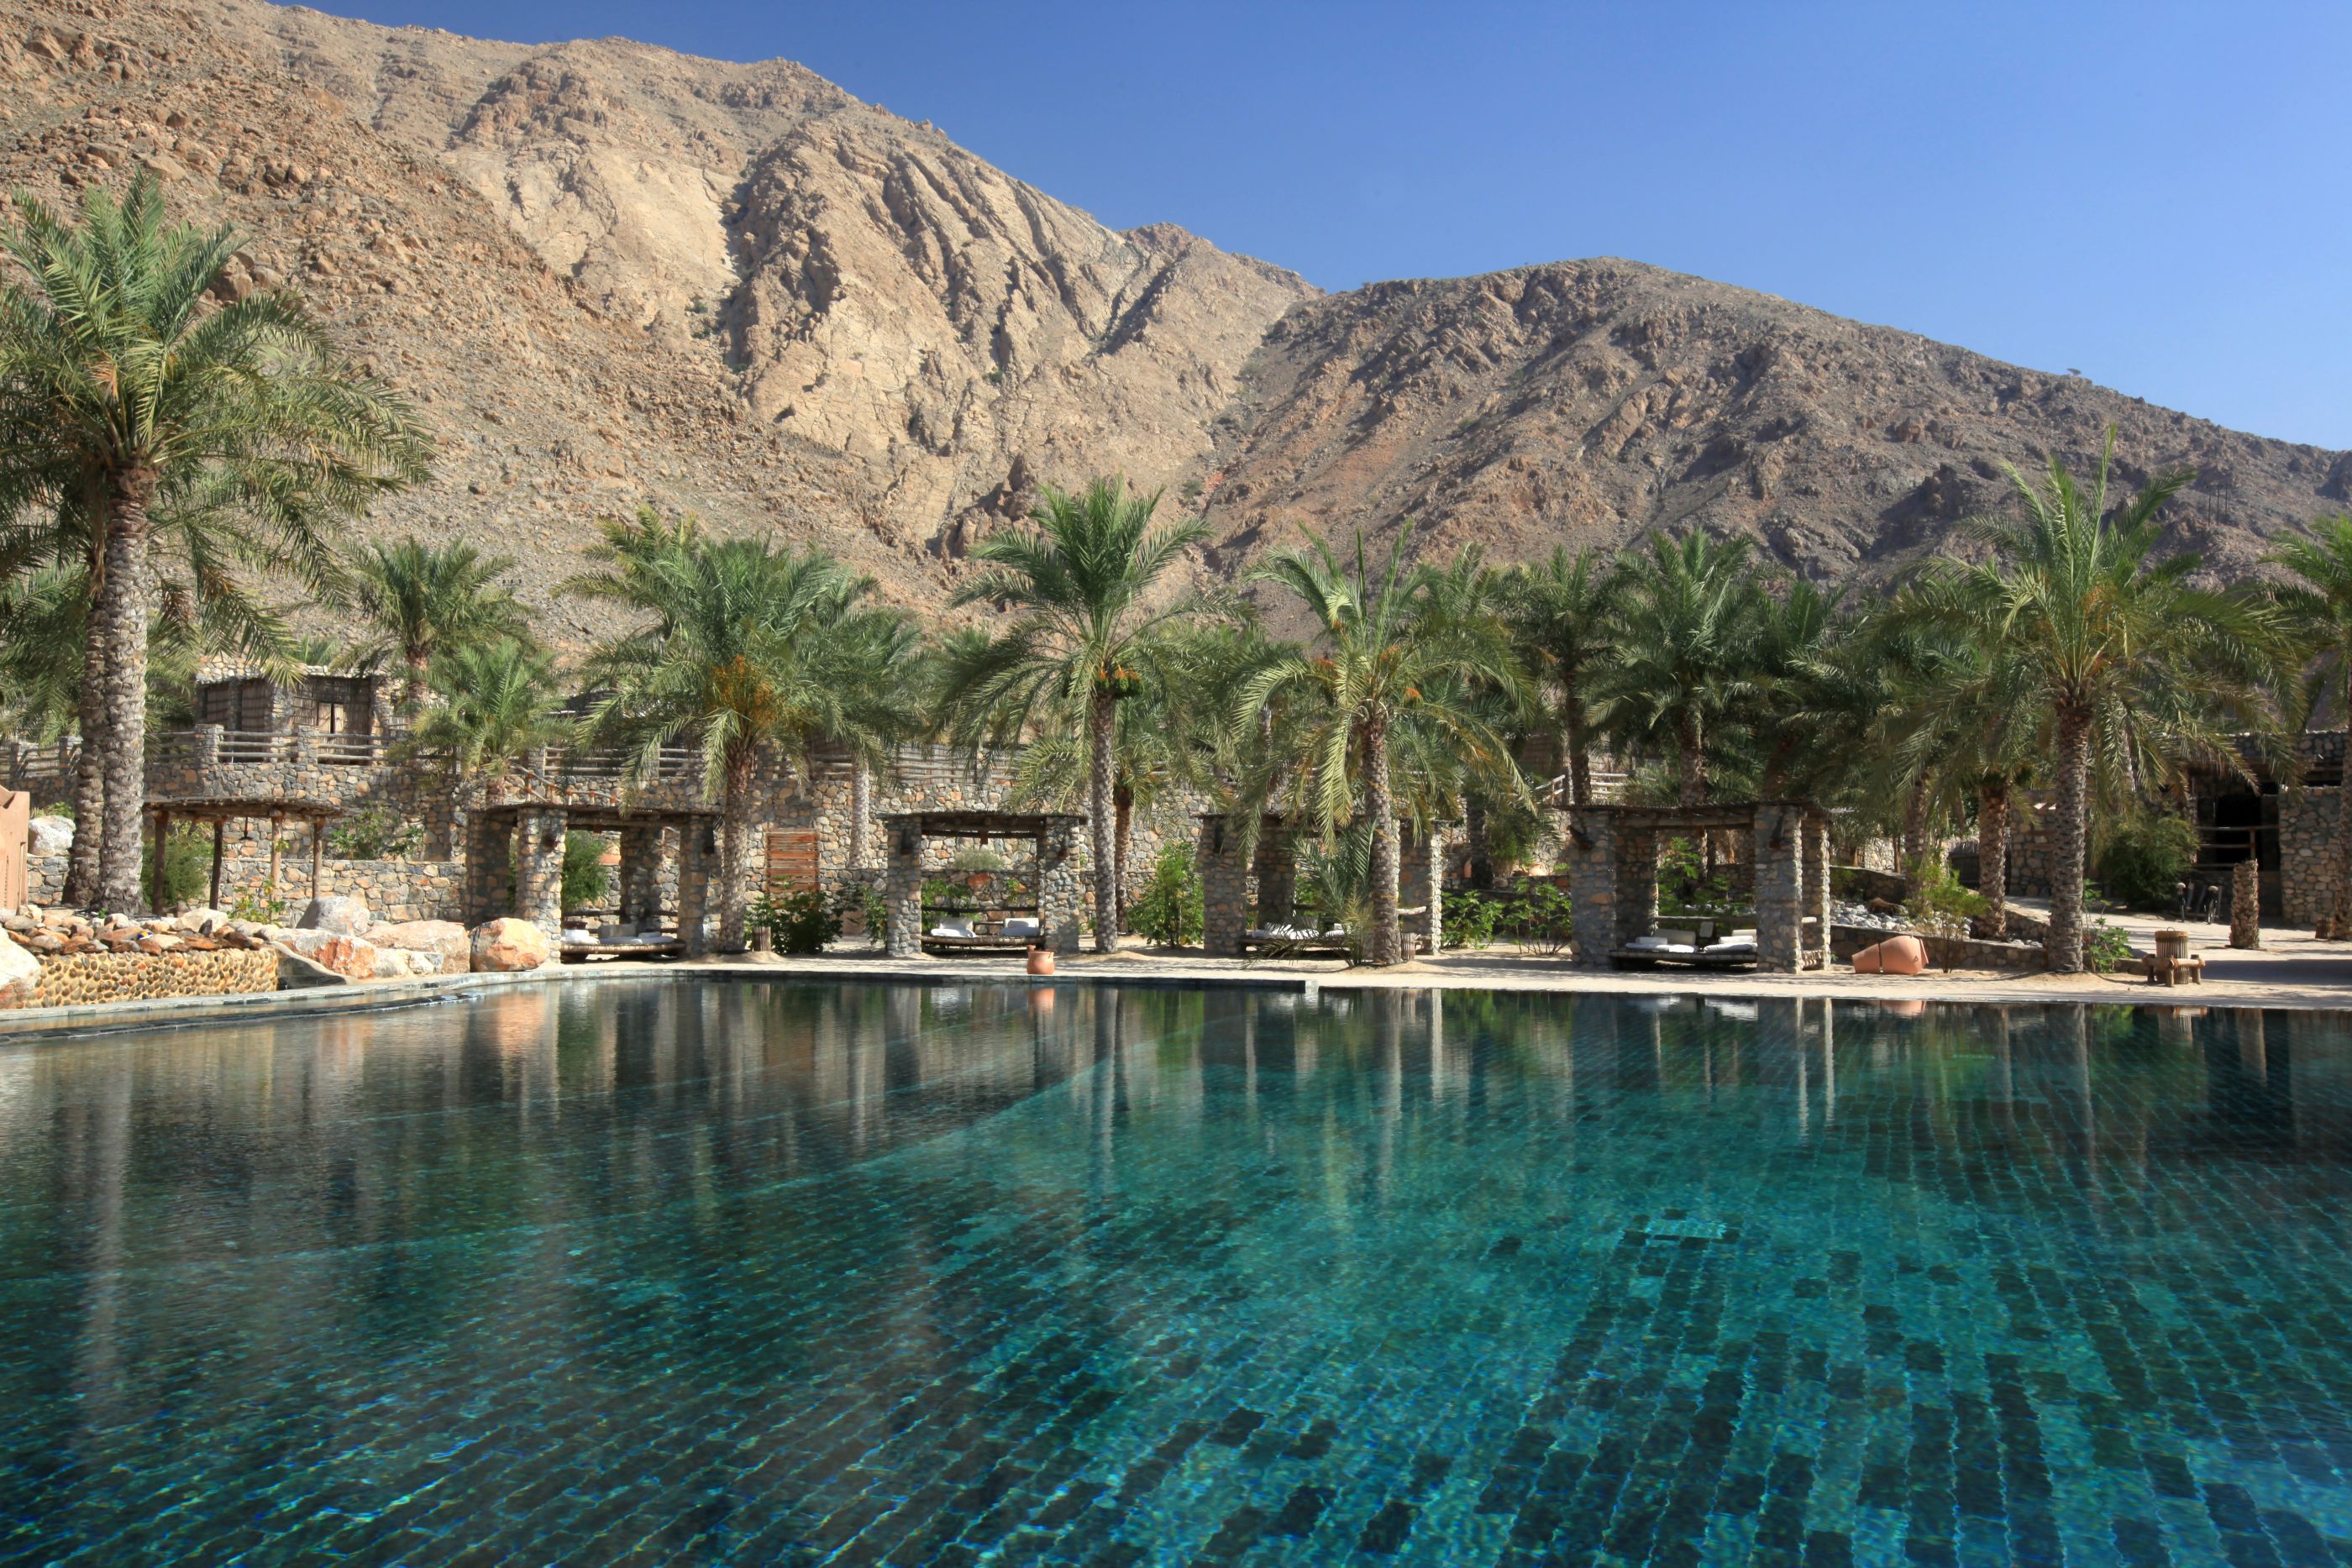 The central swimming pool of Six Senses Zighy Bay, Oman